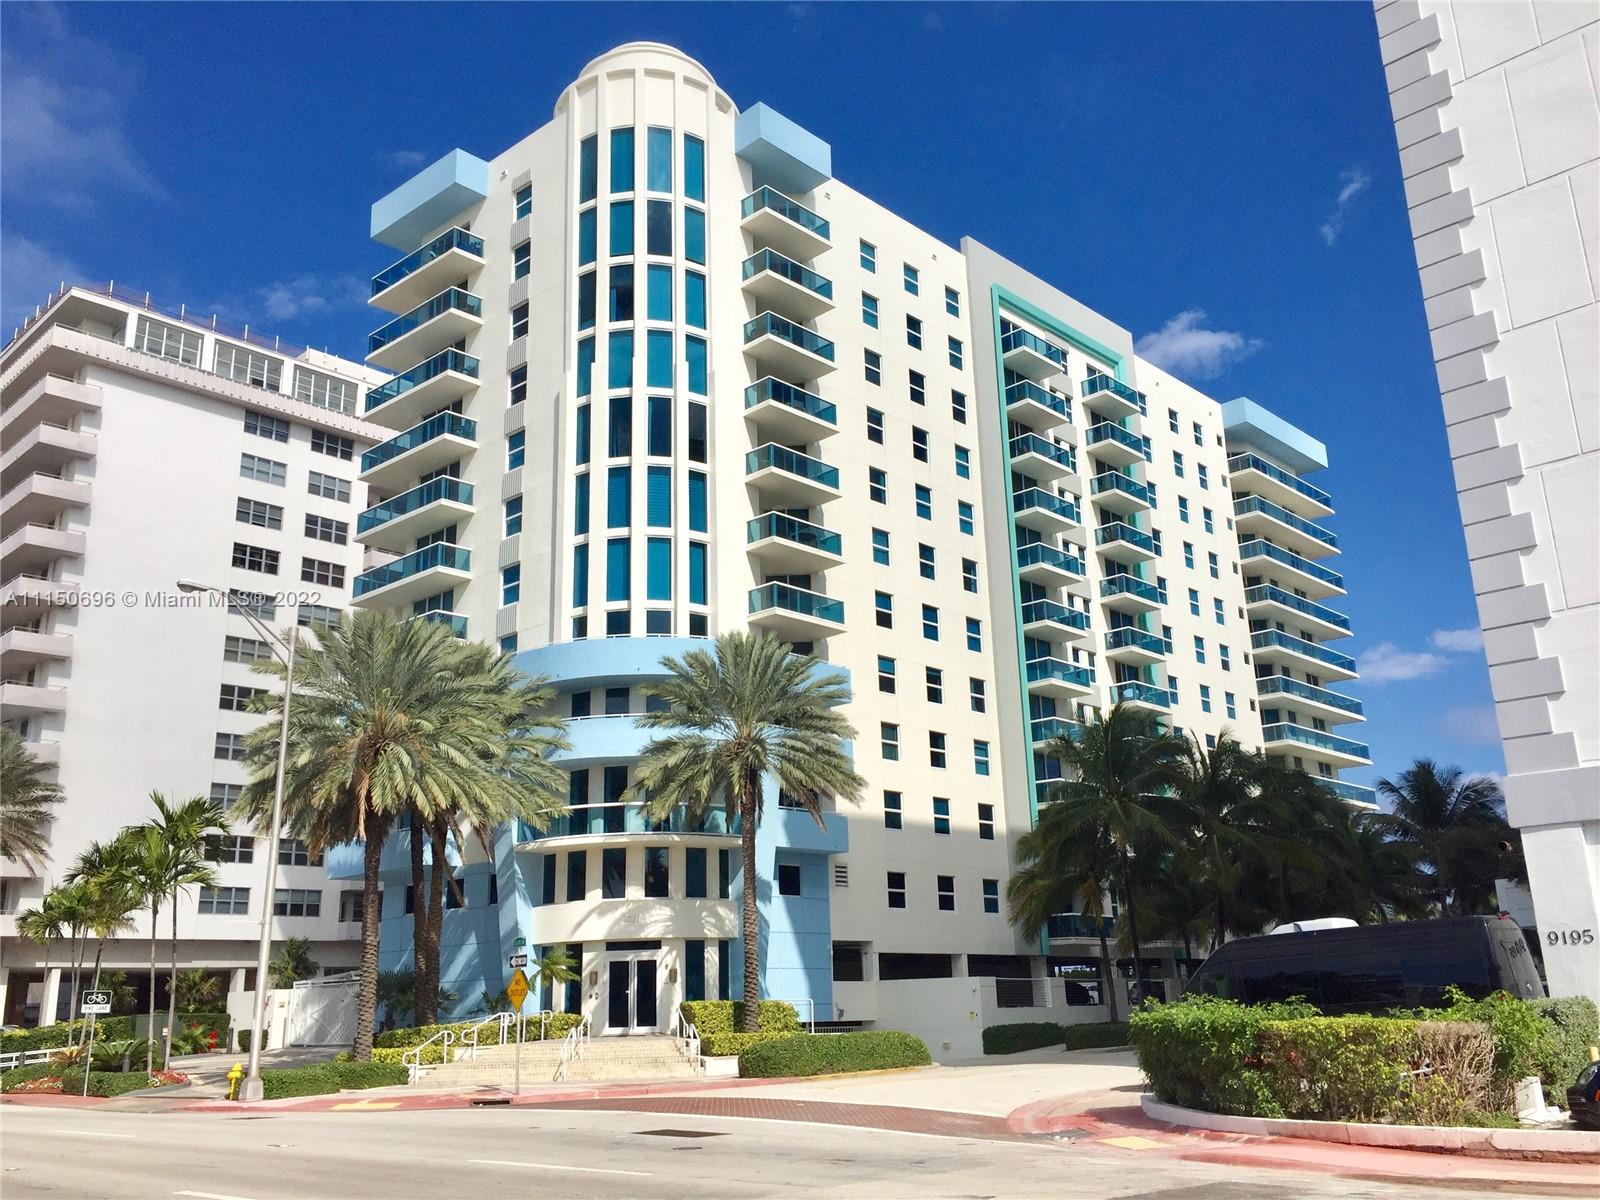 Stunning unit in a small boutique OCEANFRONT Condominium! This building features only 6 units per fl